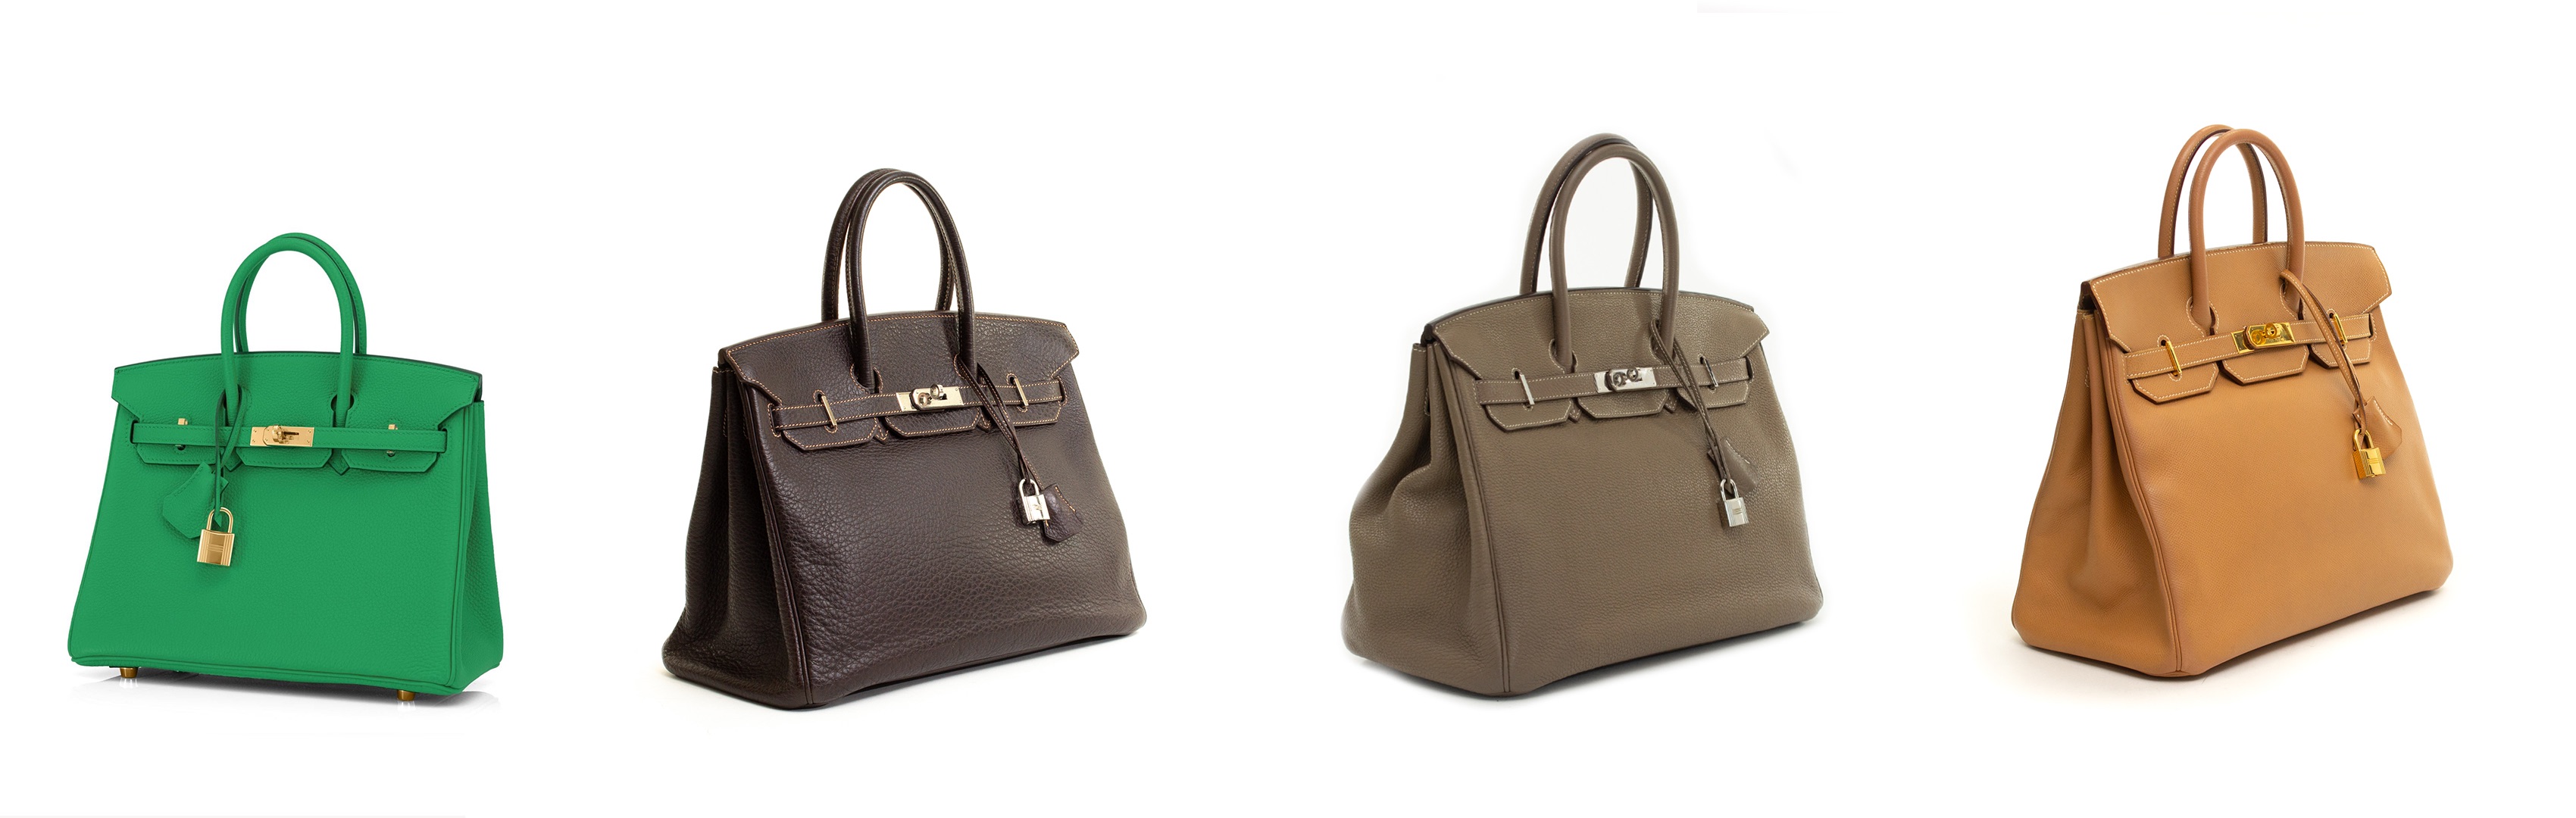 The Complete Guide to the Hermès Birkin Faubourg